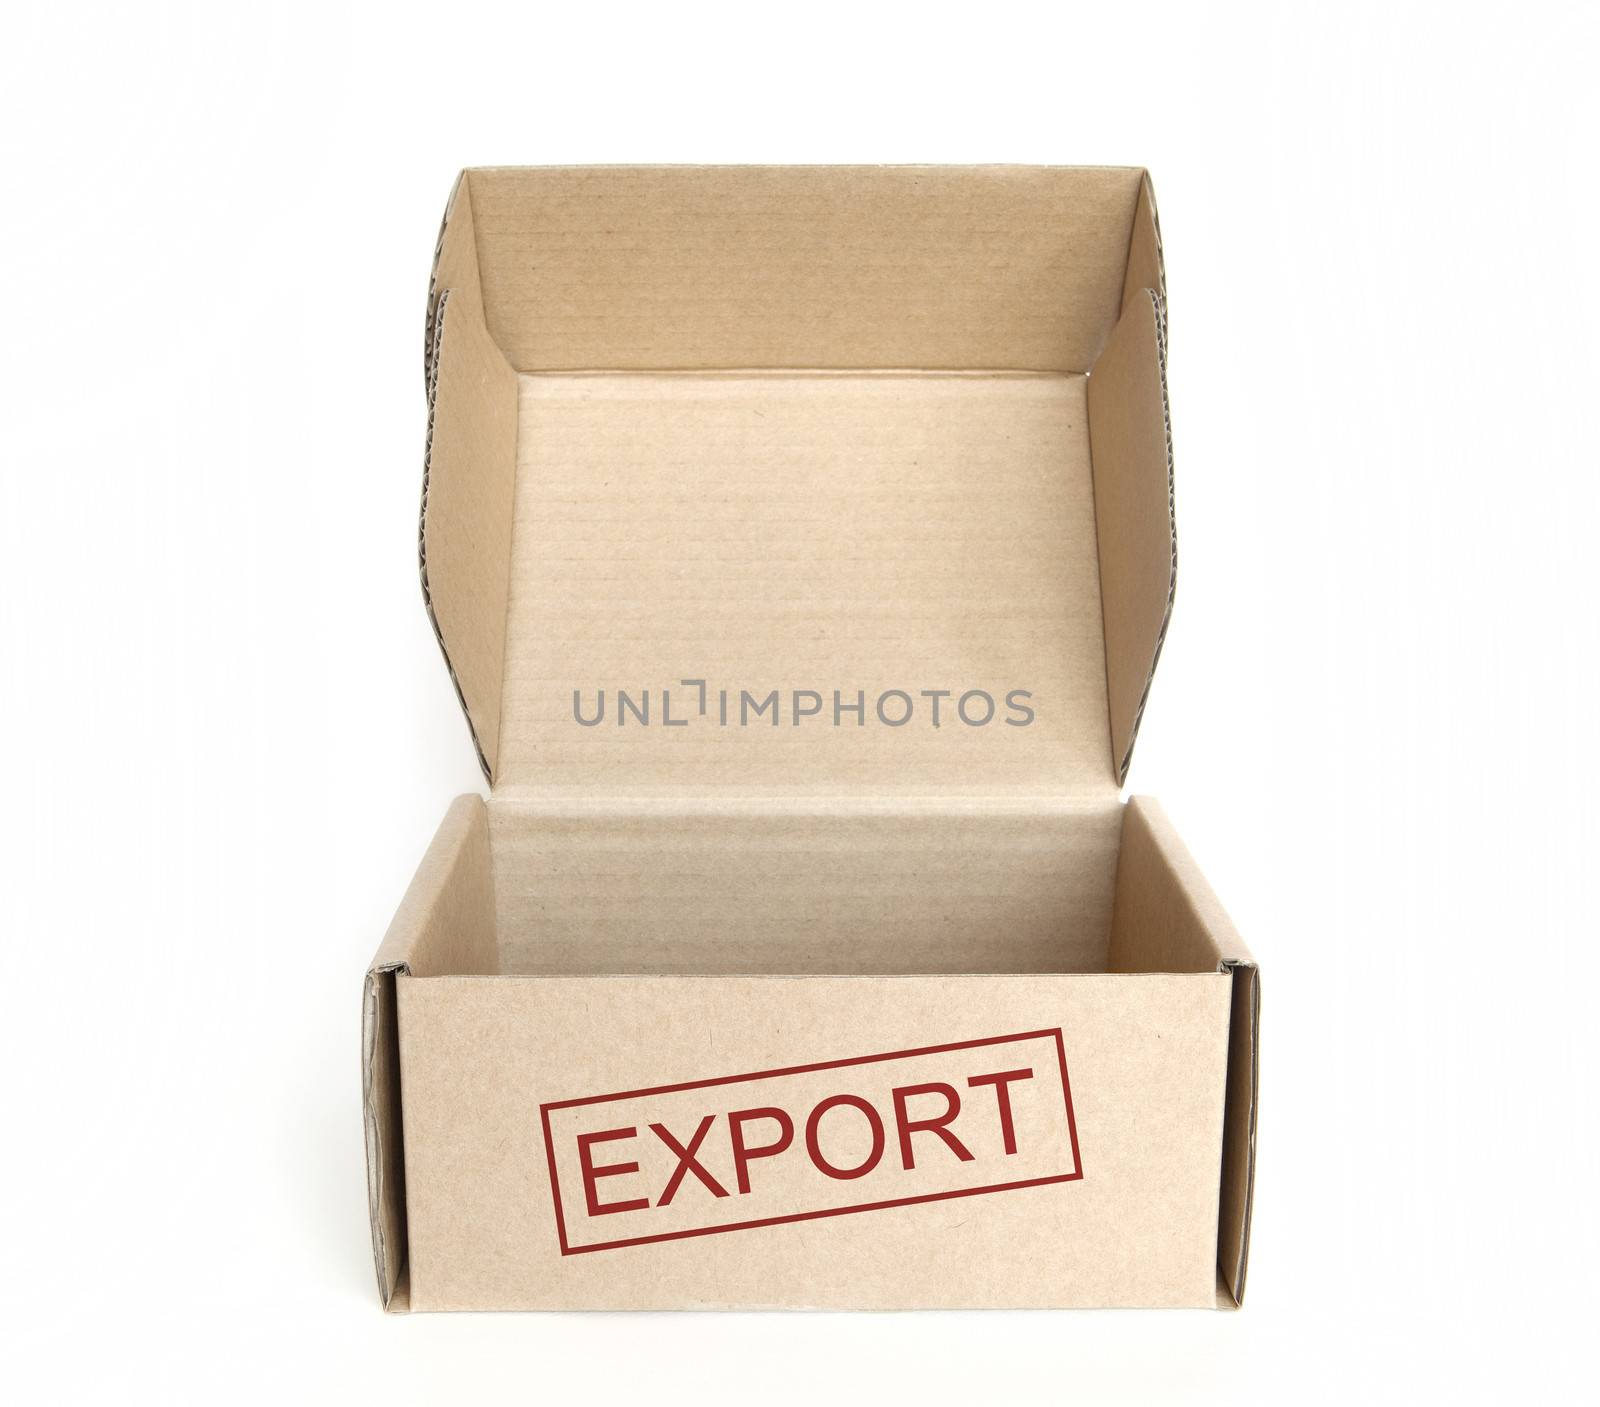 empty export cardboard box on white background